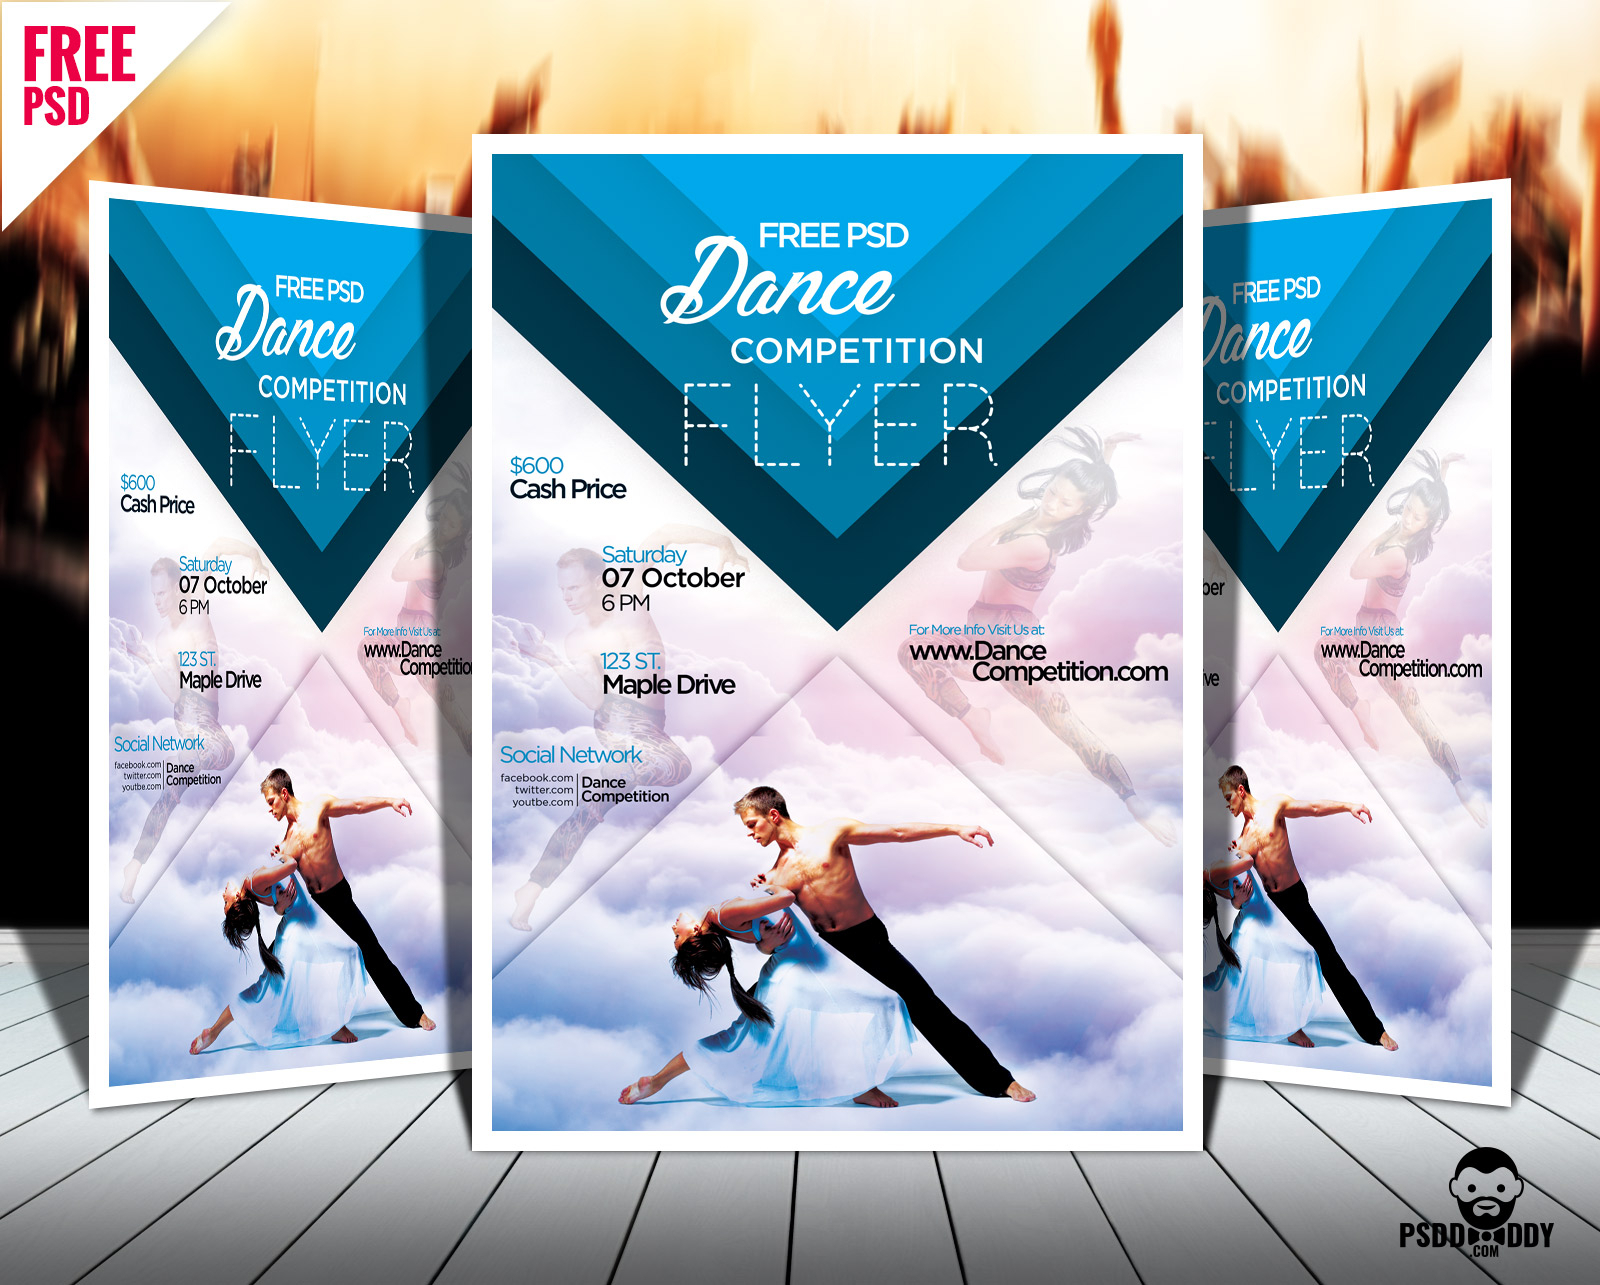 Download] Dance Competition Flyer Psd | Psddaddy Pertaining To Graphic Design Flyer Templates Free